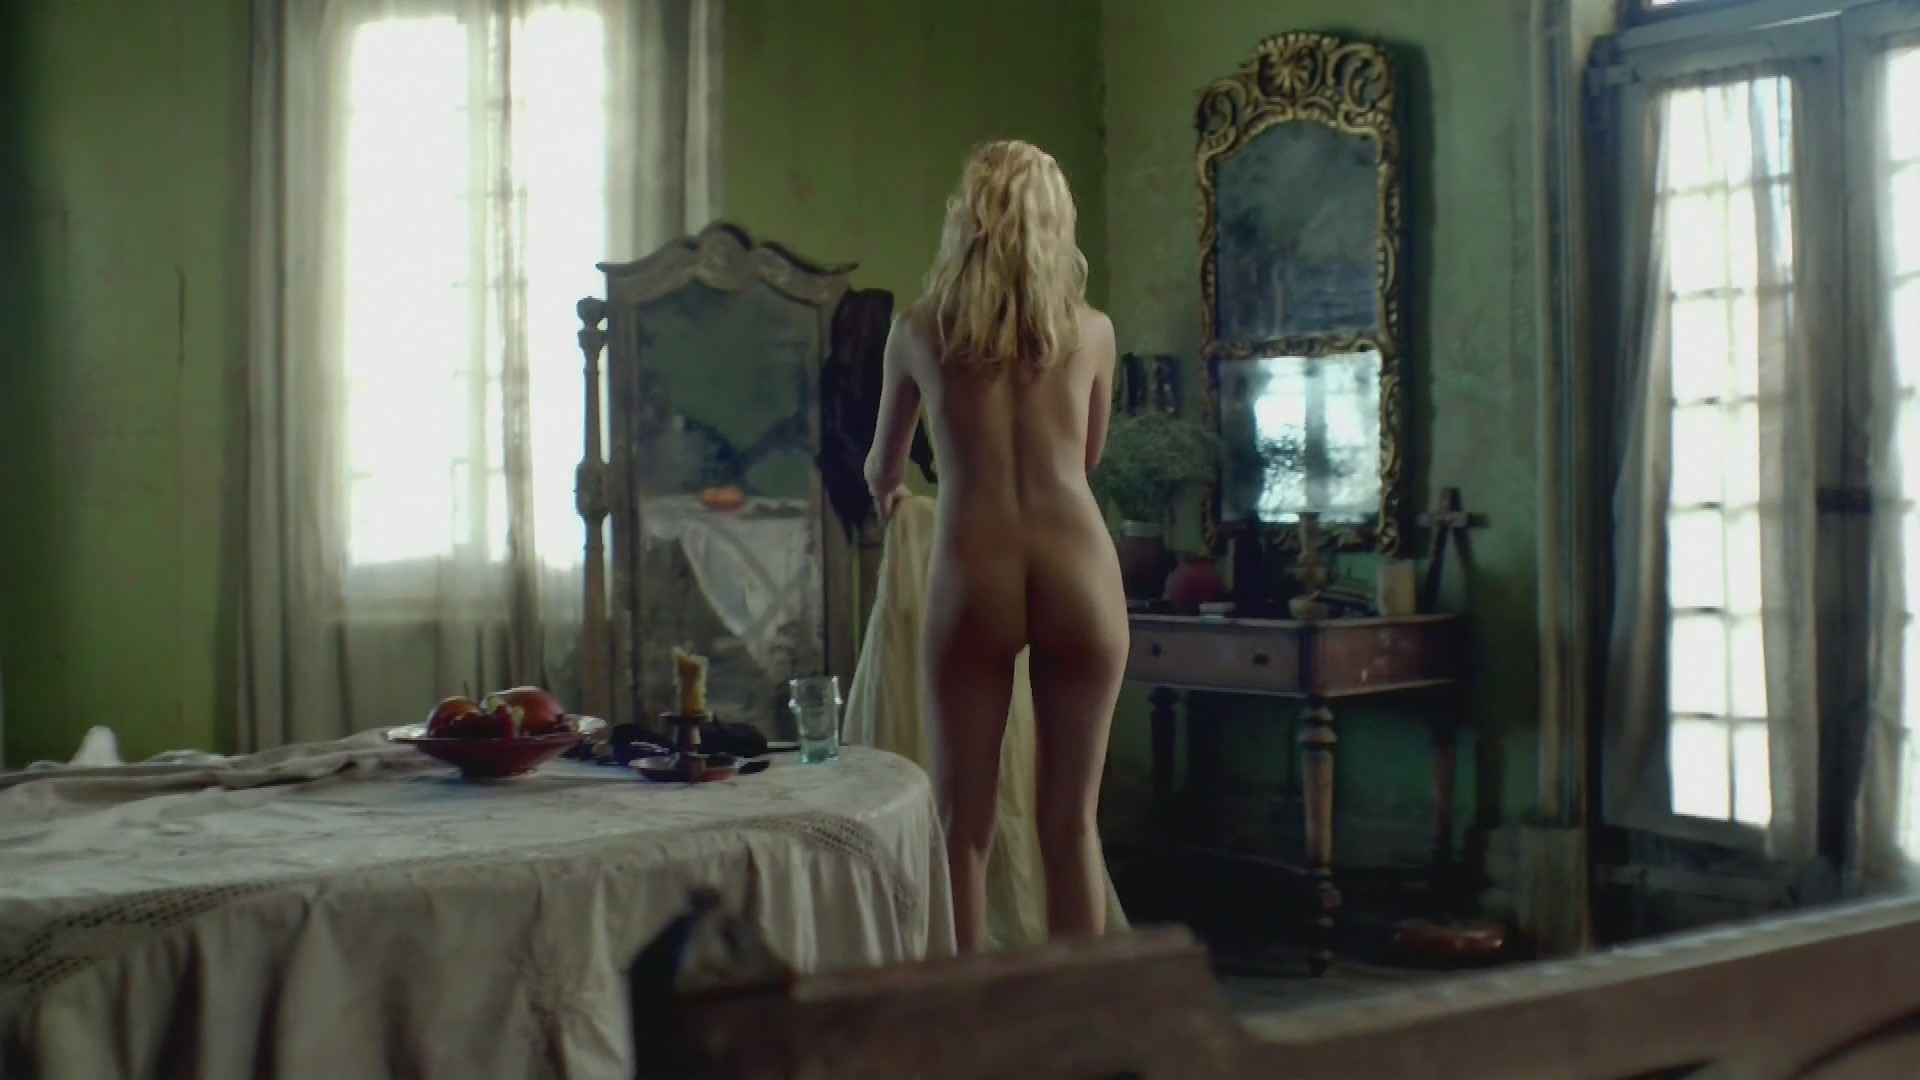 Hot hannah new nude sex scenes in black sails